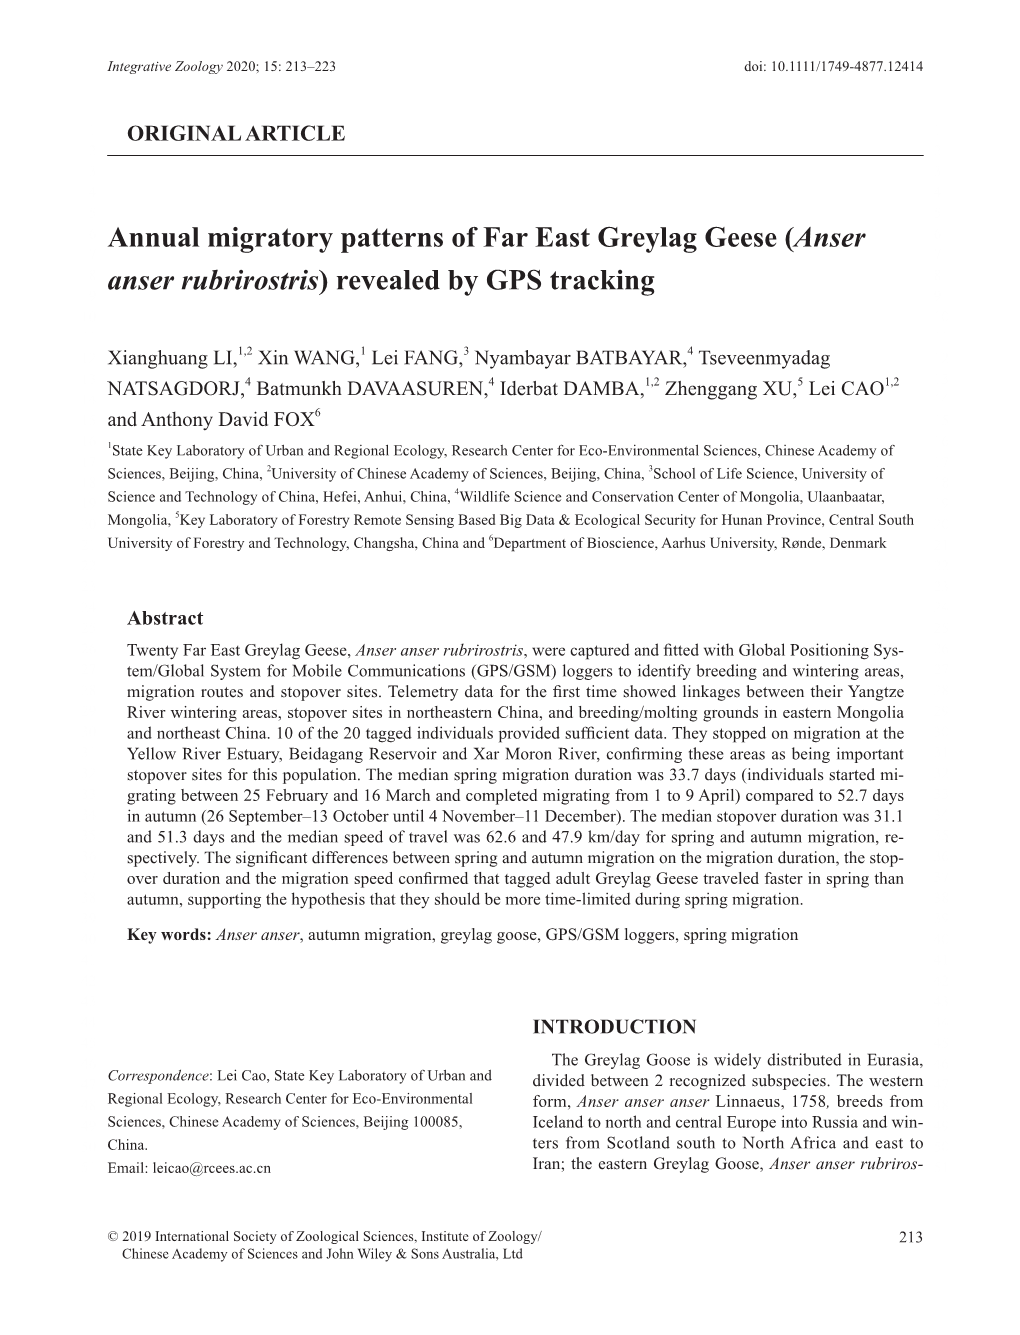 Annual Migratory Patterns of Far East Greylag Geese